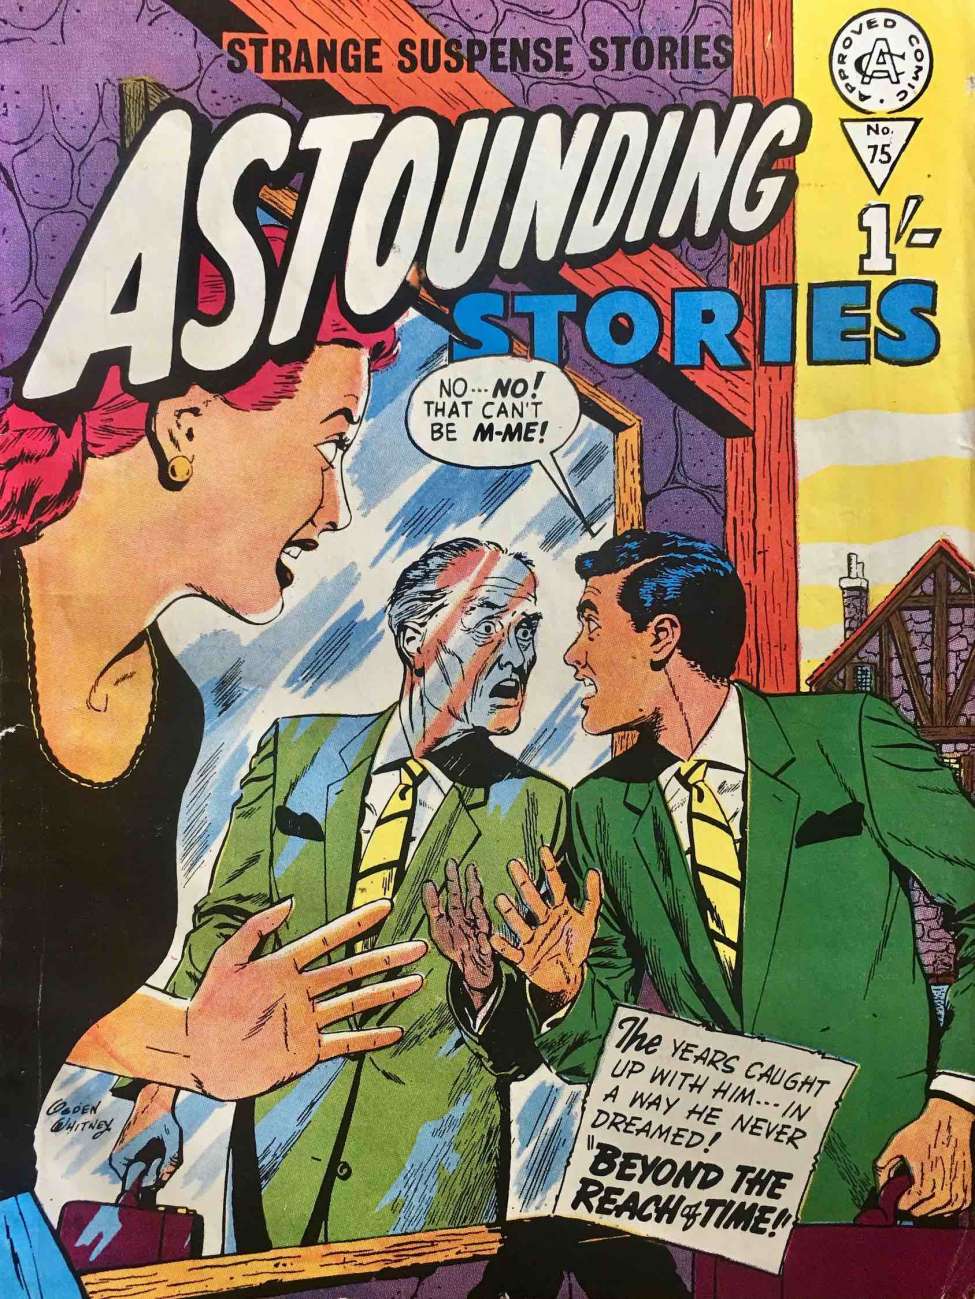 Book Cover For Astounding Stories 75